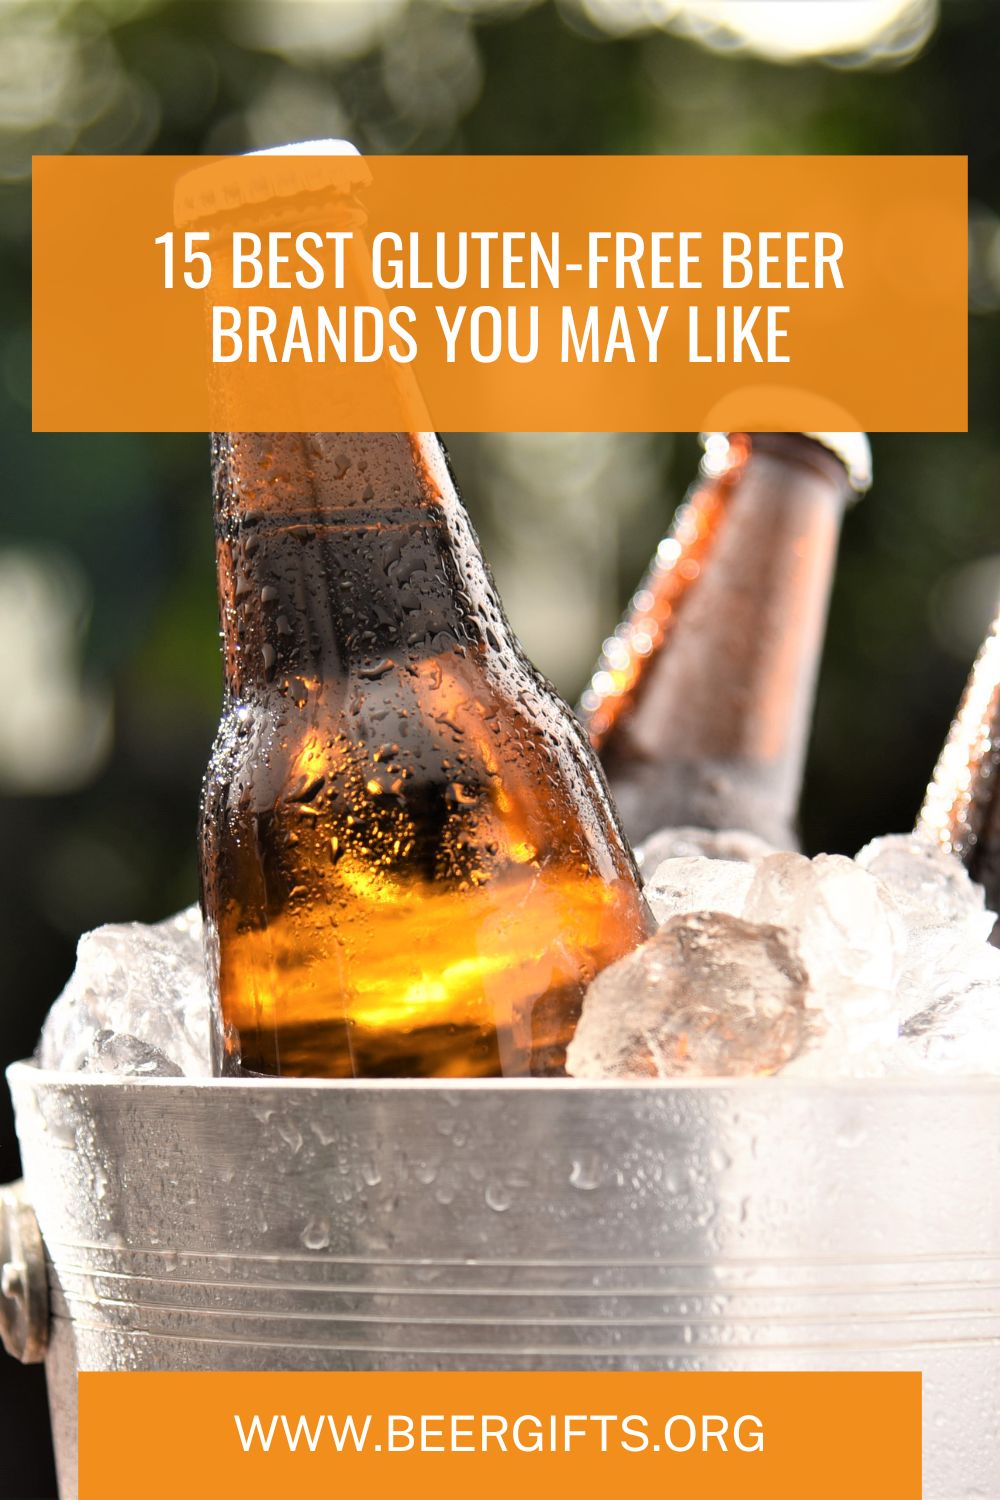 15 Best Gluten-Free Beer Brands You May Like2